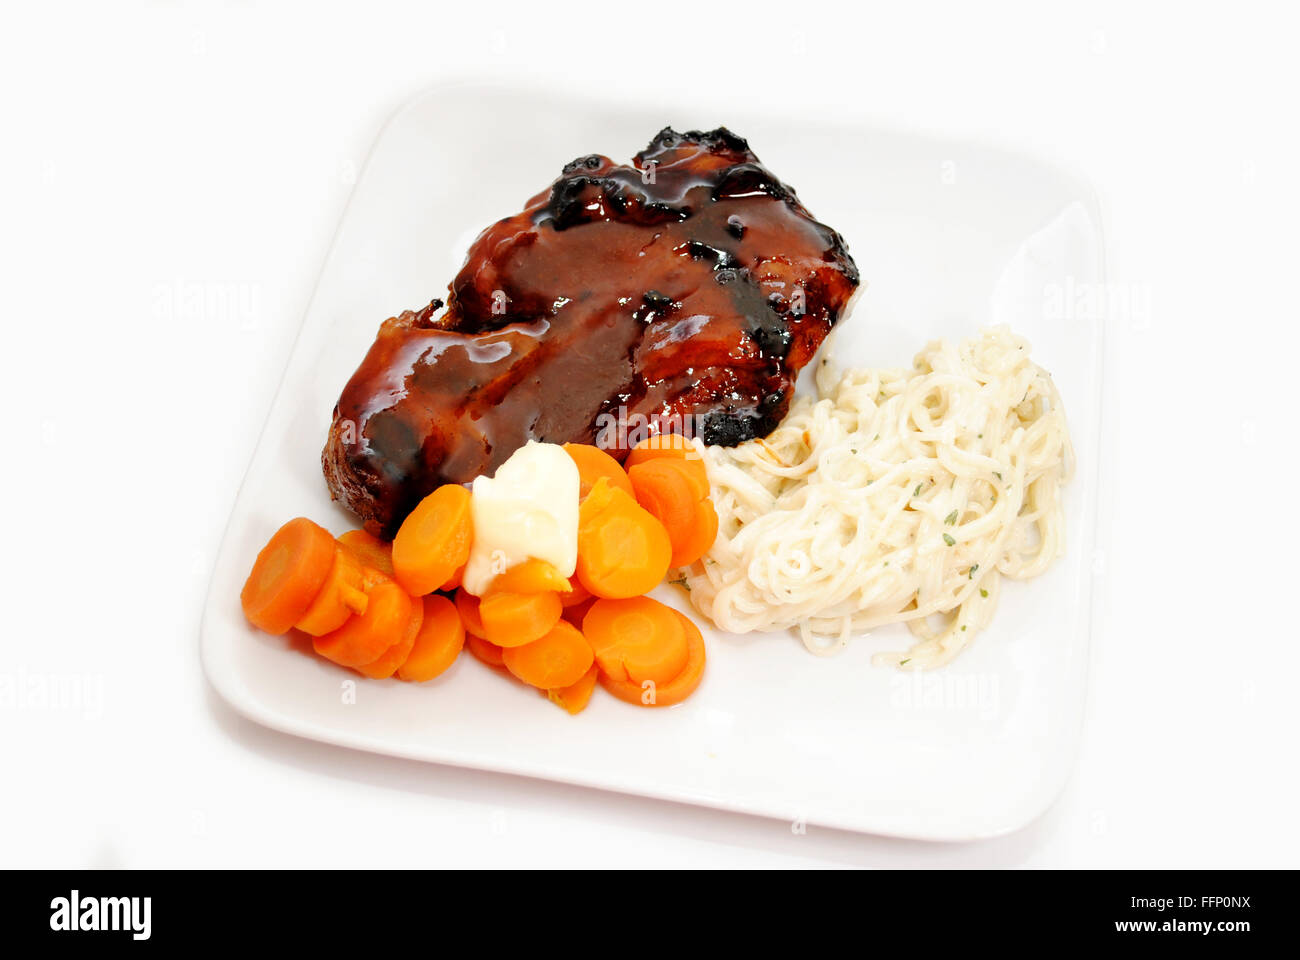 Delicious Summer Meal of Pork Rib, Carrots and Pasta Stock Photo